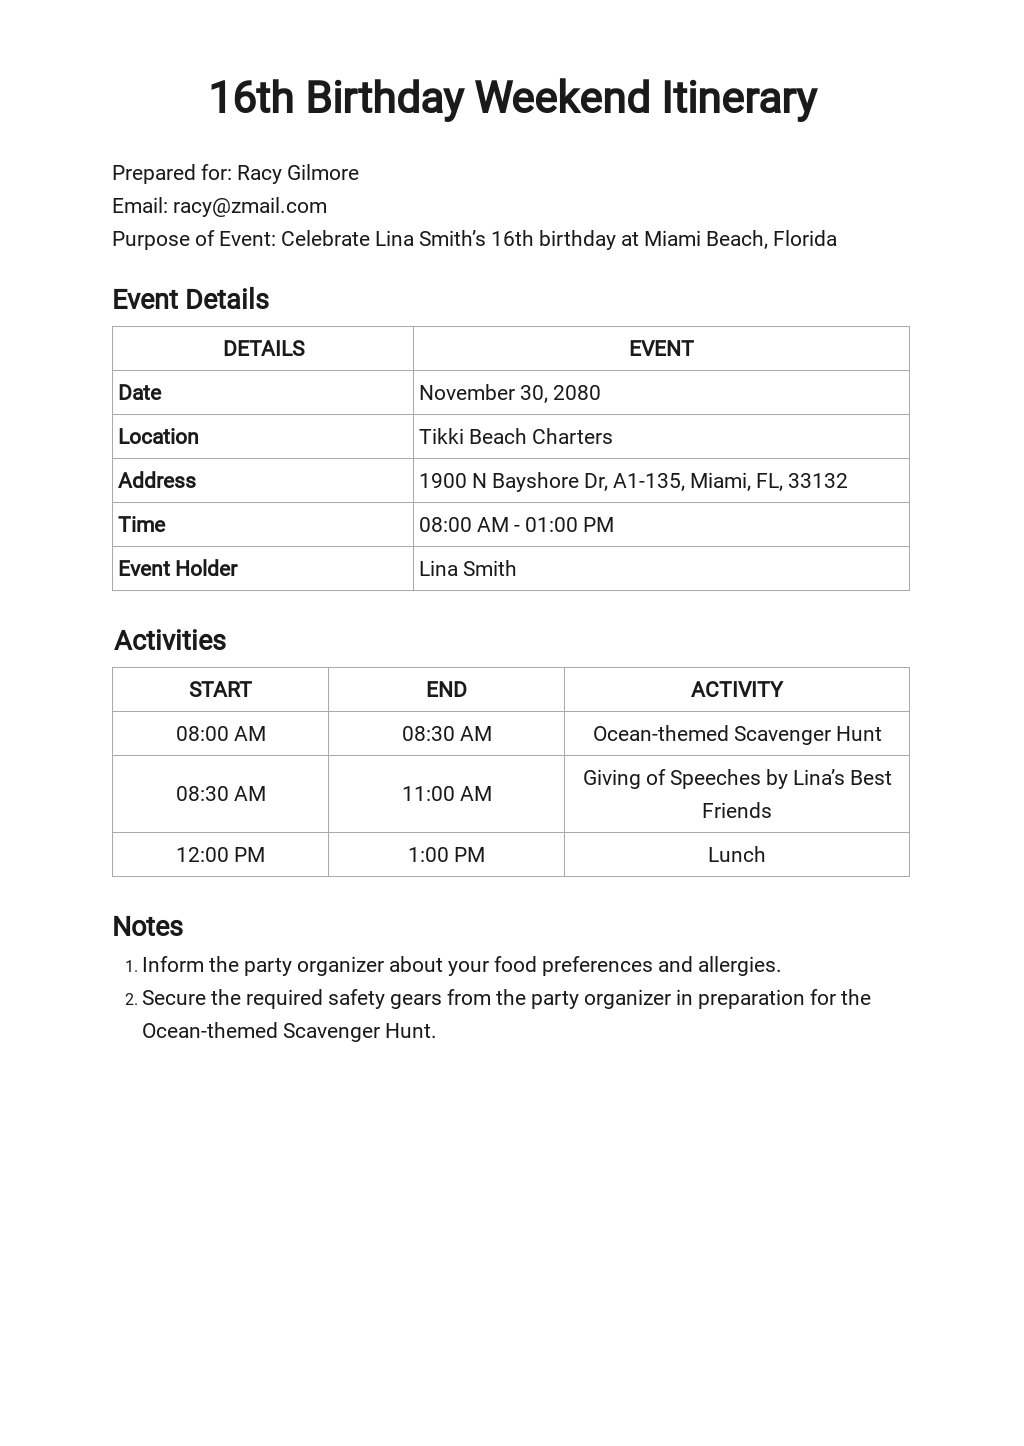 Birthday Weekend Itinerary Template [Free PDF] Word (DOC) Apple